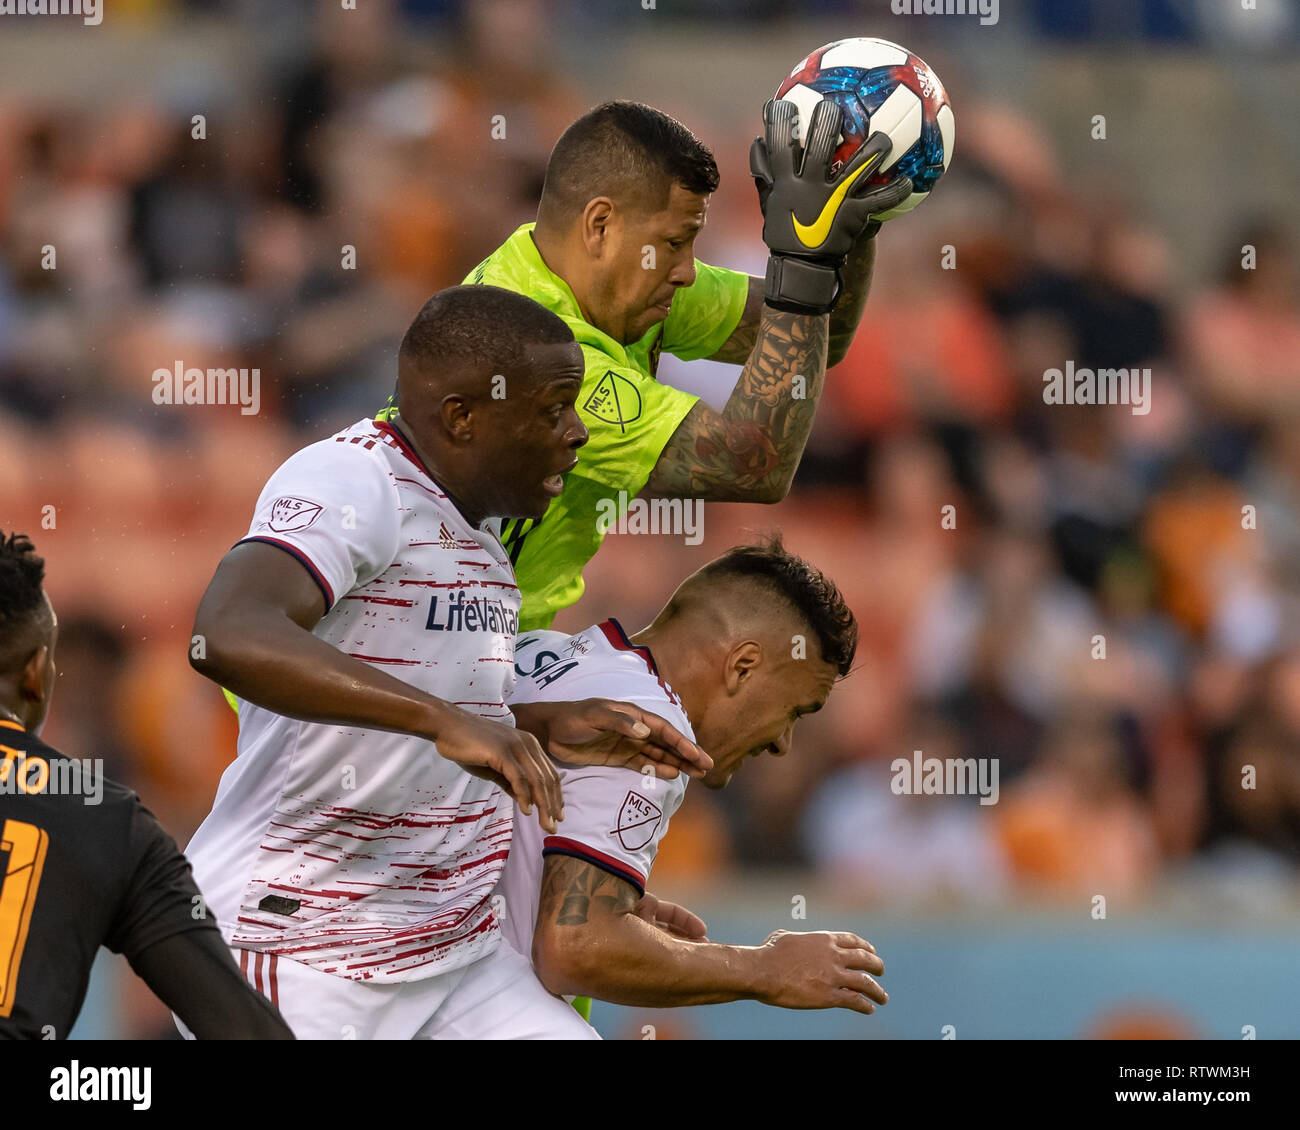 March 02, 2019: Real Salt Lake goalkeeper Nick Rimando (18) with the save while his teammates help defend during a match between Real Salt Lake and Houston Dynamo at BBVA Compass Stadium in Houston, Texas Houston Dynamo tie with Real Salt Lake1-1 © Maria Lysaker/Cal Sport Media Stock Photo